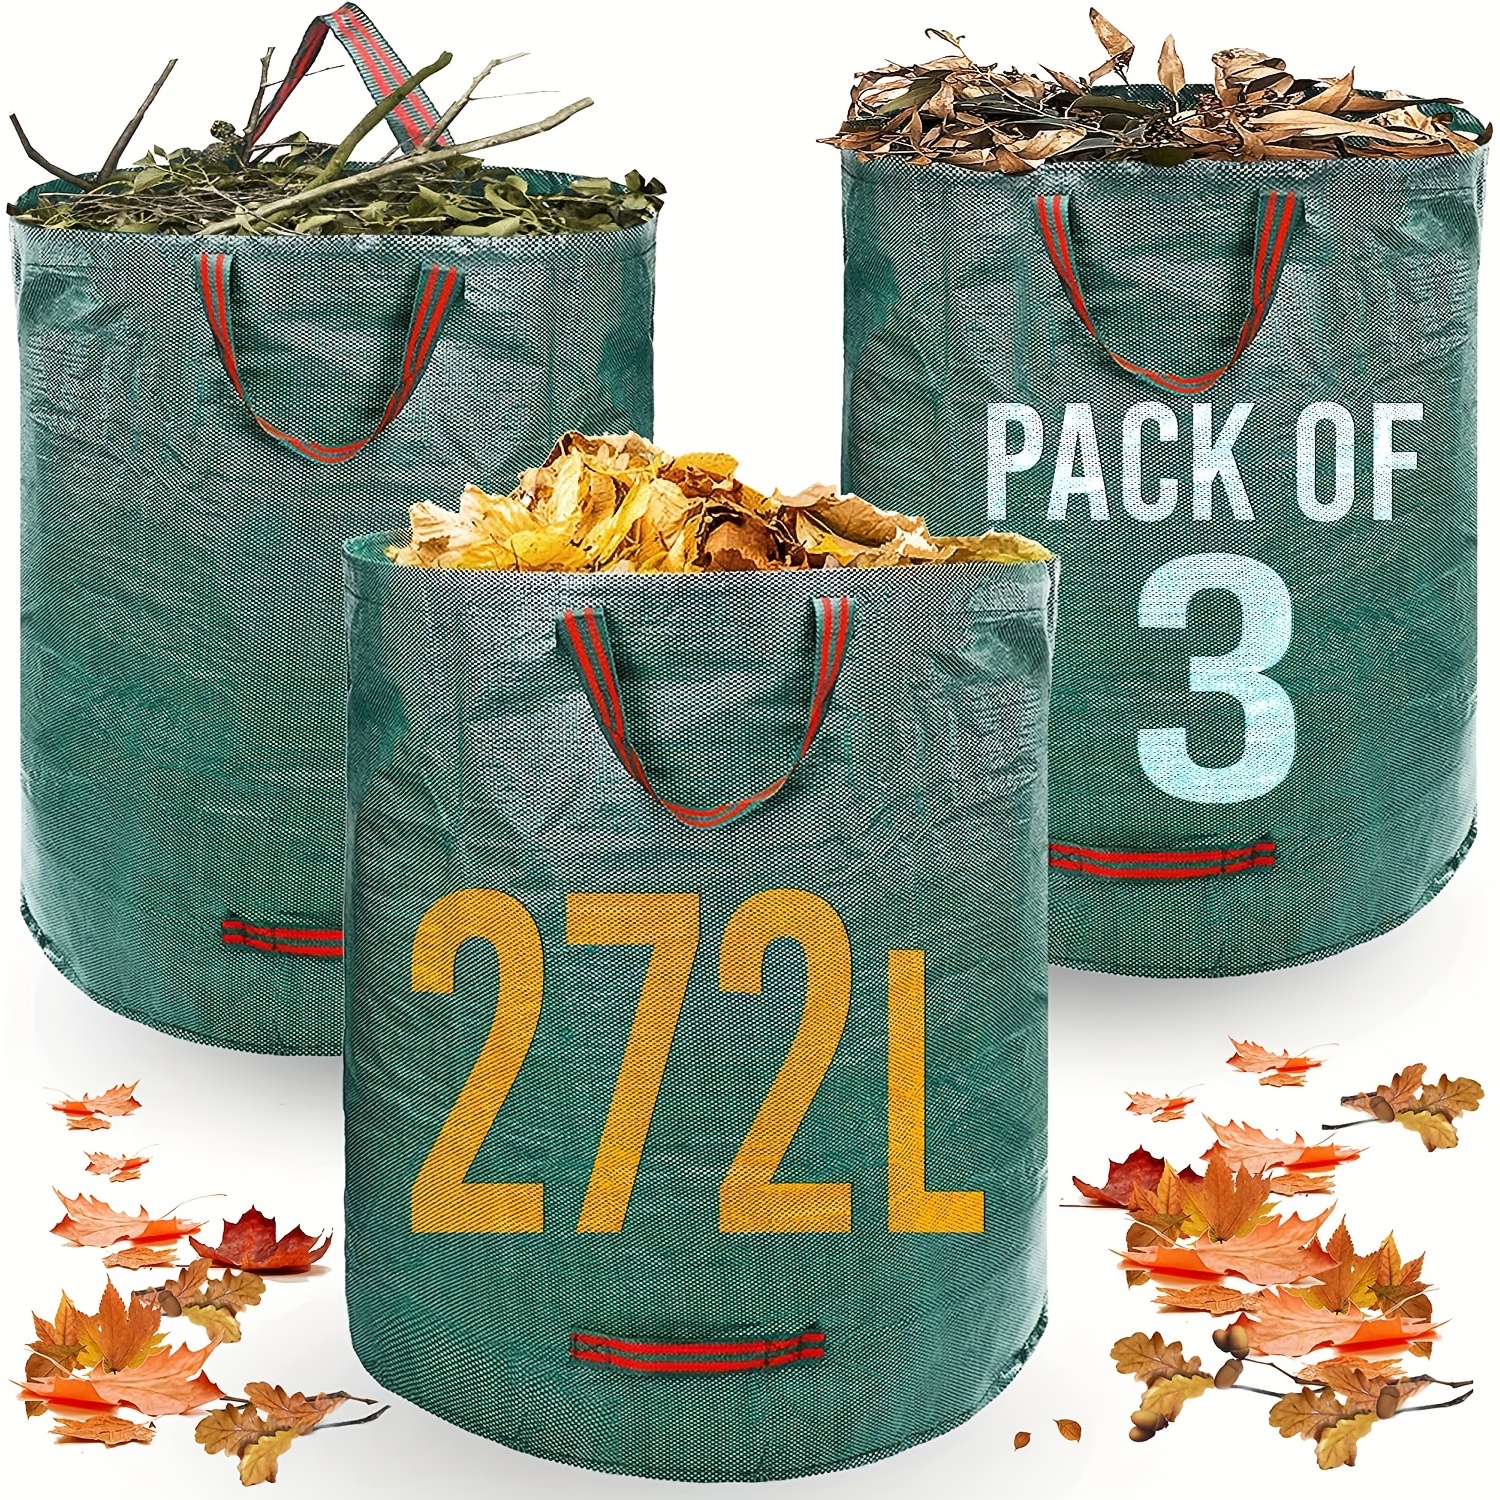 72 Gallons Garden Bag Collapsible Reuseable Heavy Duty Garden Waste Bags  for Lawn Yard Leaf Trash Debris Garden bags with Gardening Gloves(3-Pack)